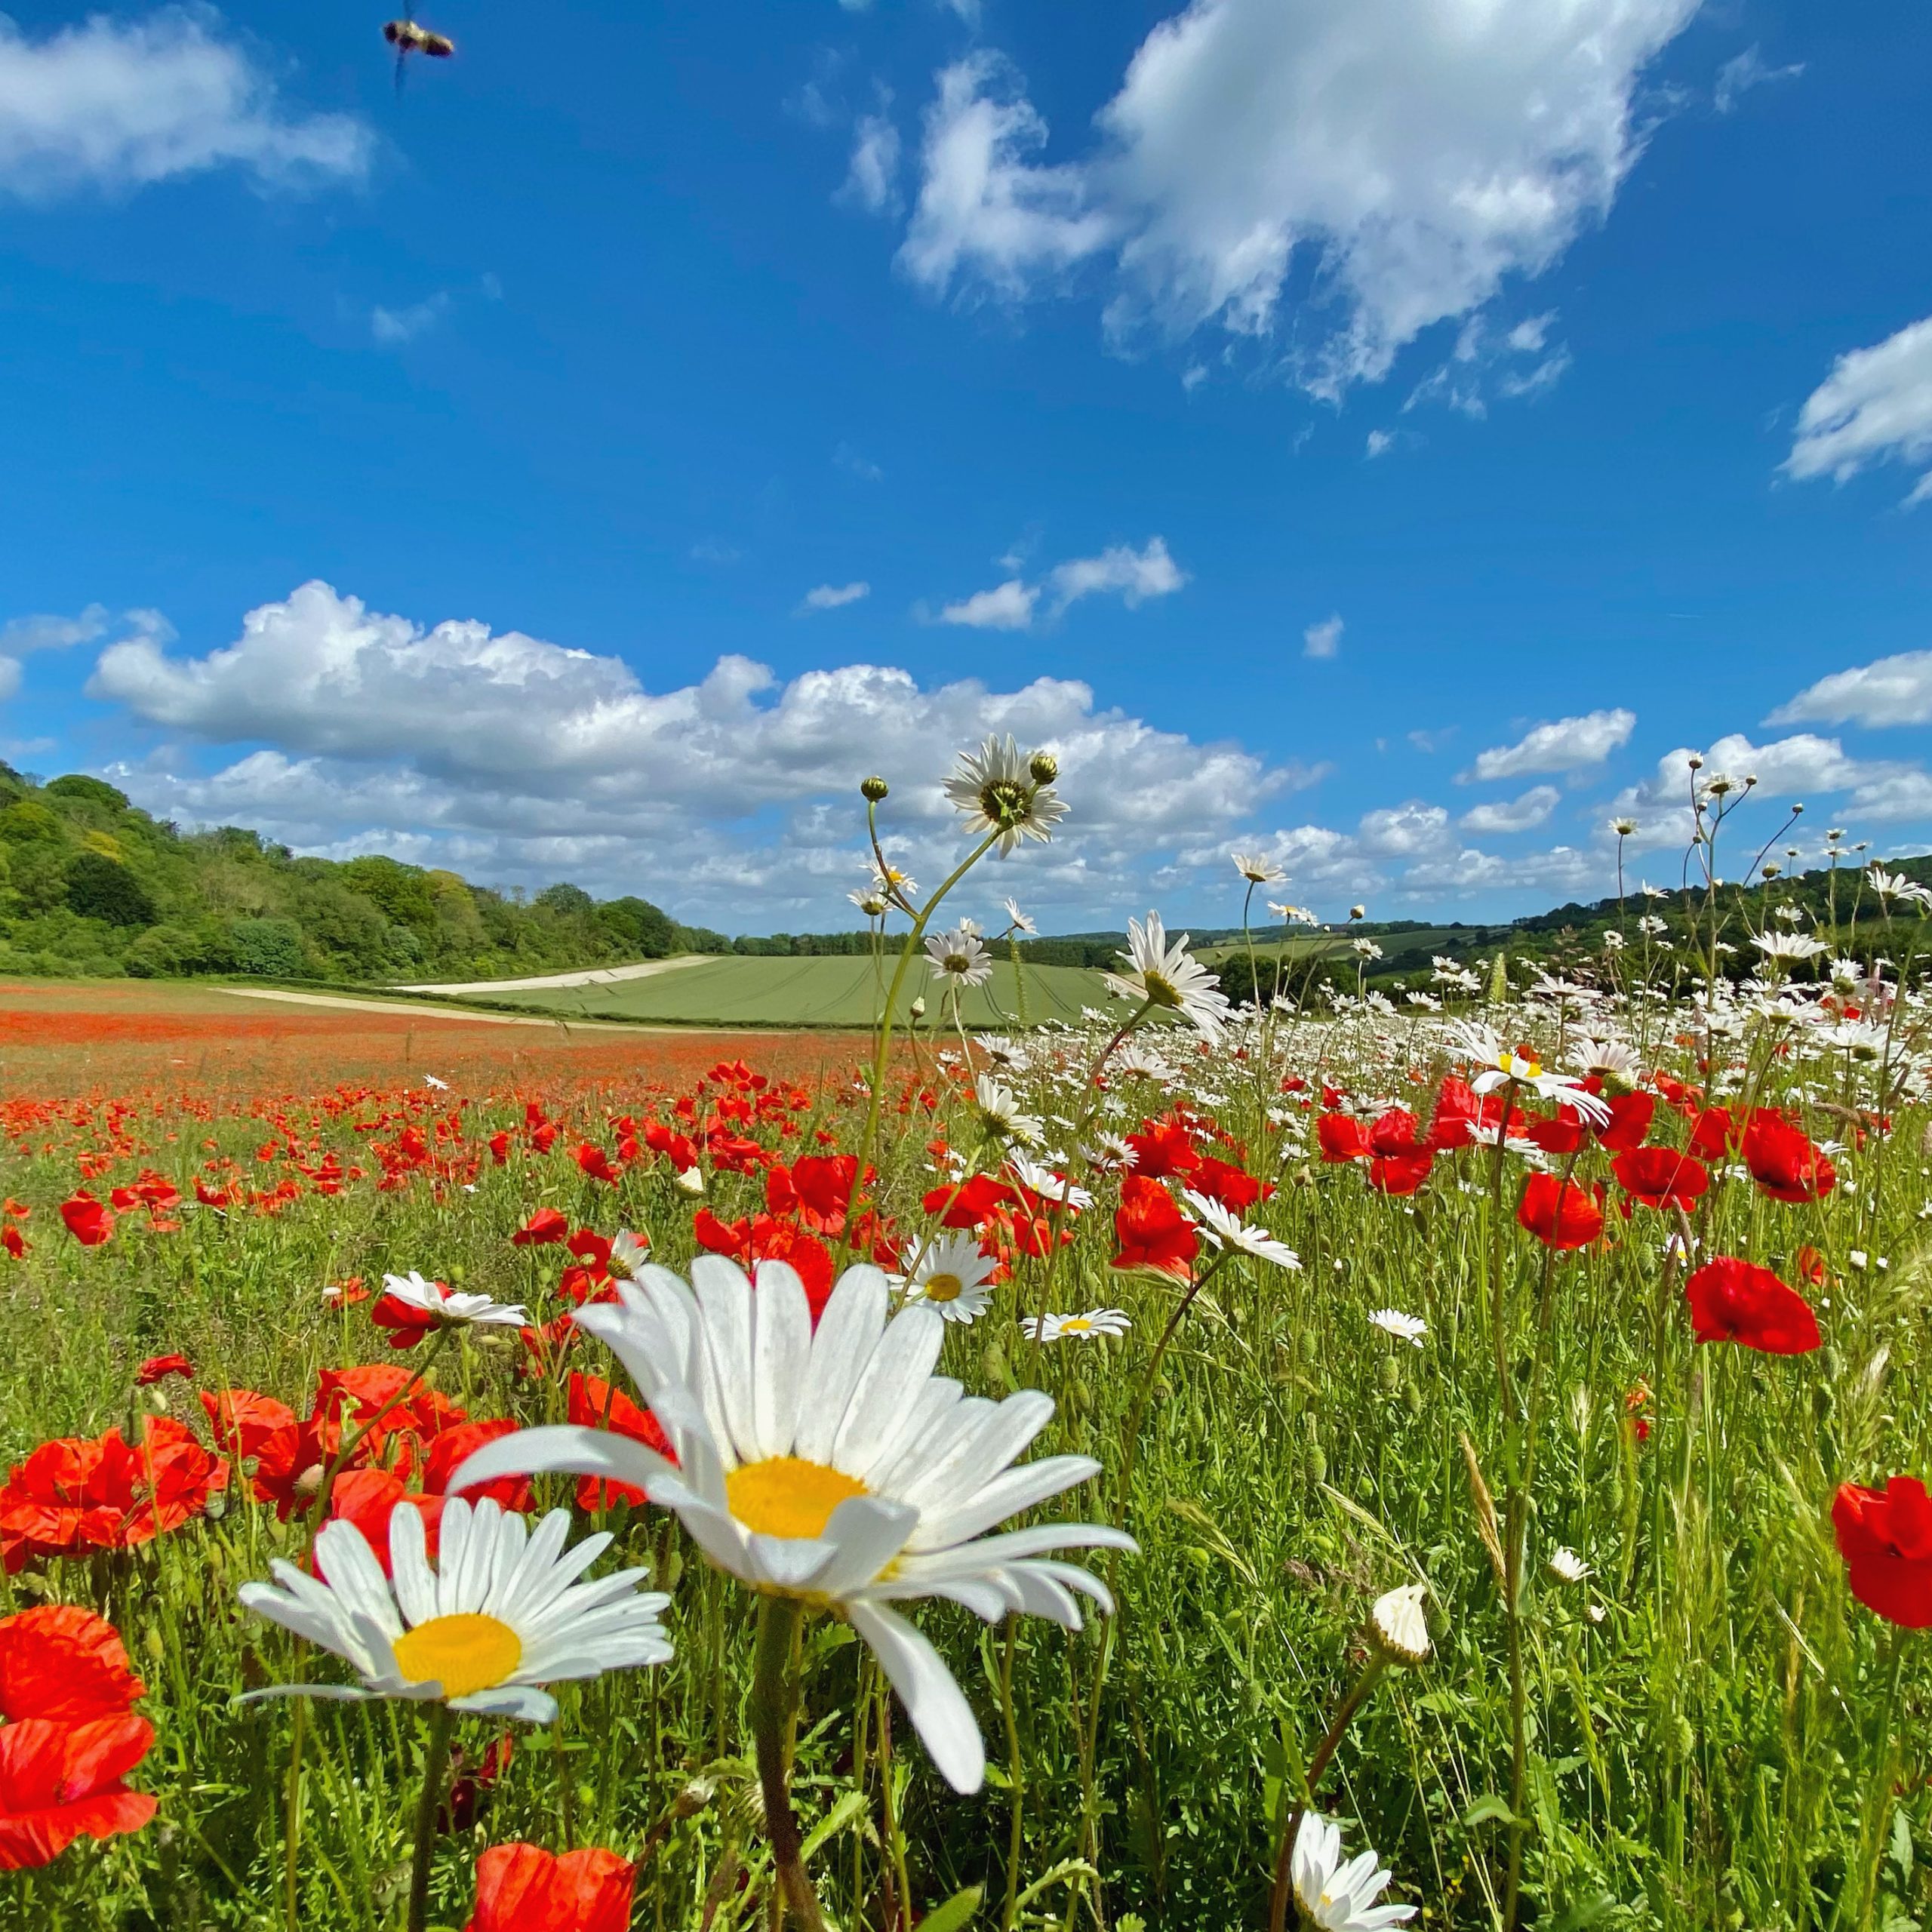 Oxeye daisies and poppies flourishing in Crundale Valley, Kent